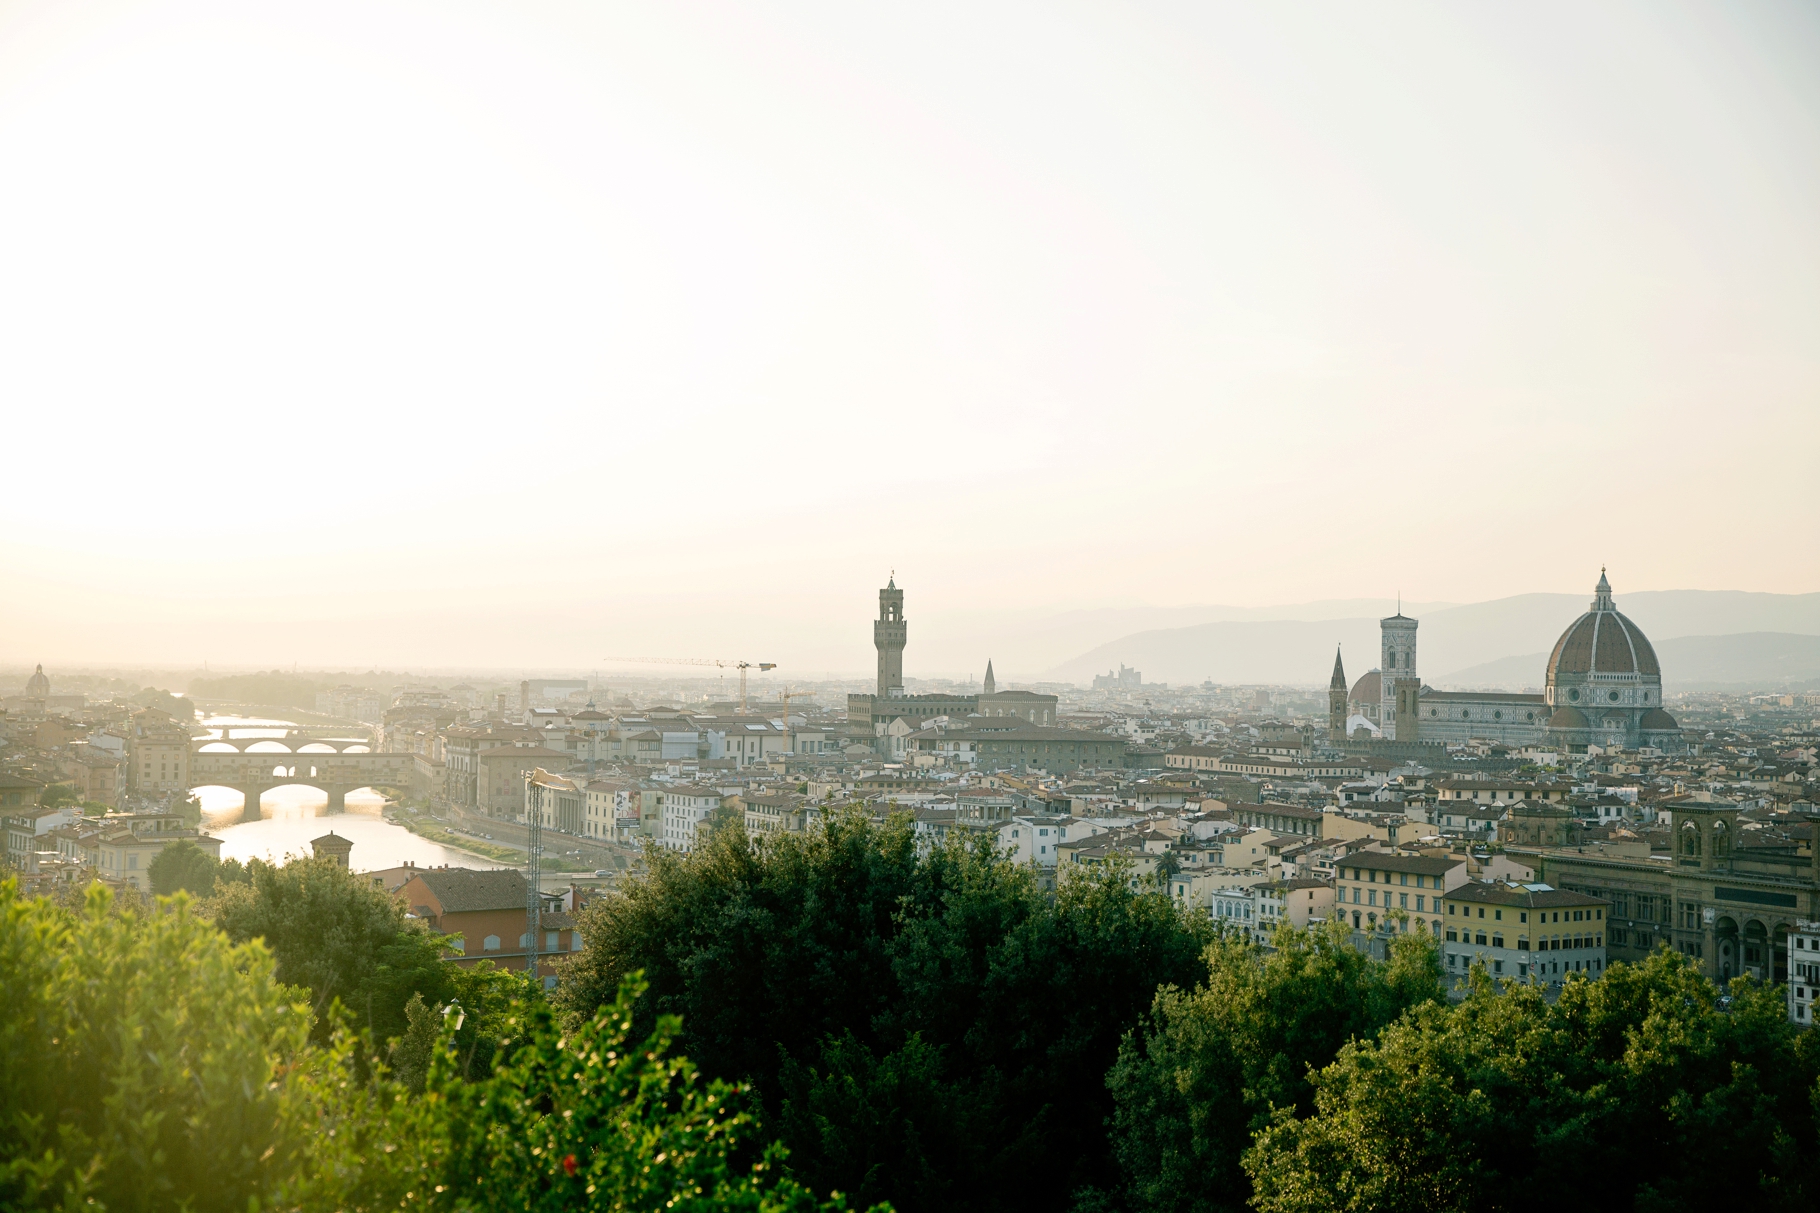 10-Florence-Italy-Piazzale-Michelangelo-View-Sunset-Europe-Travel-Anniversary-Trip-Photography-by-Betty-Elaine